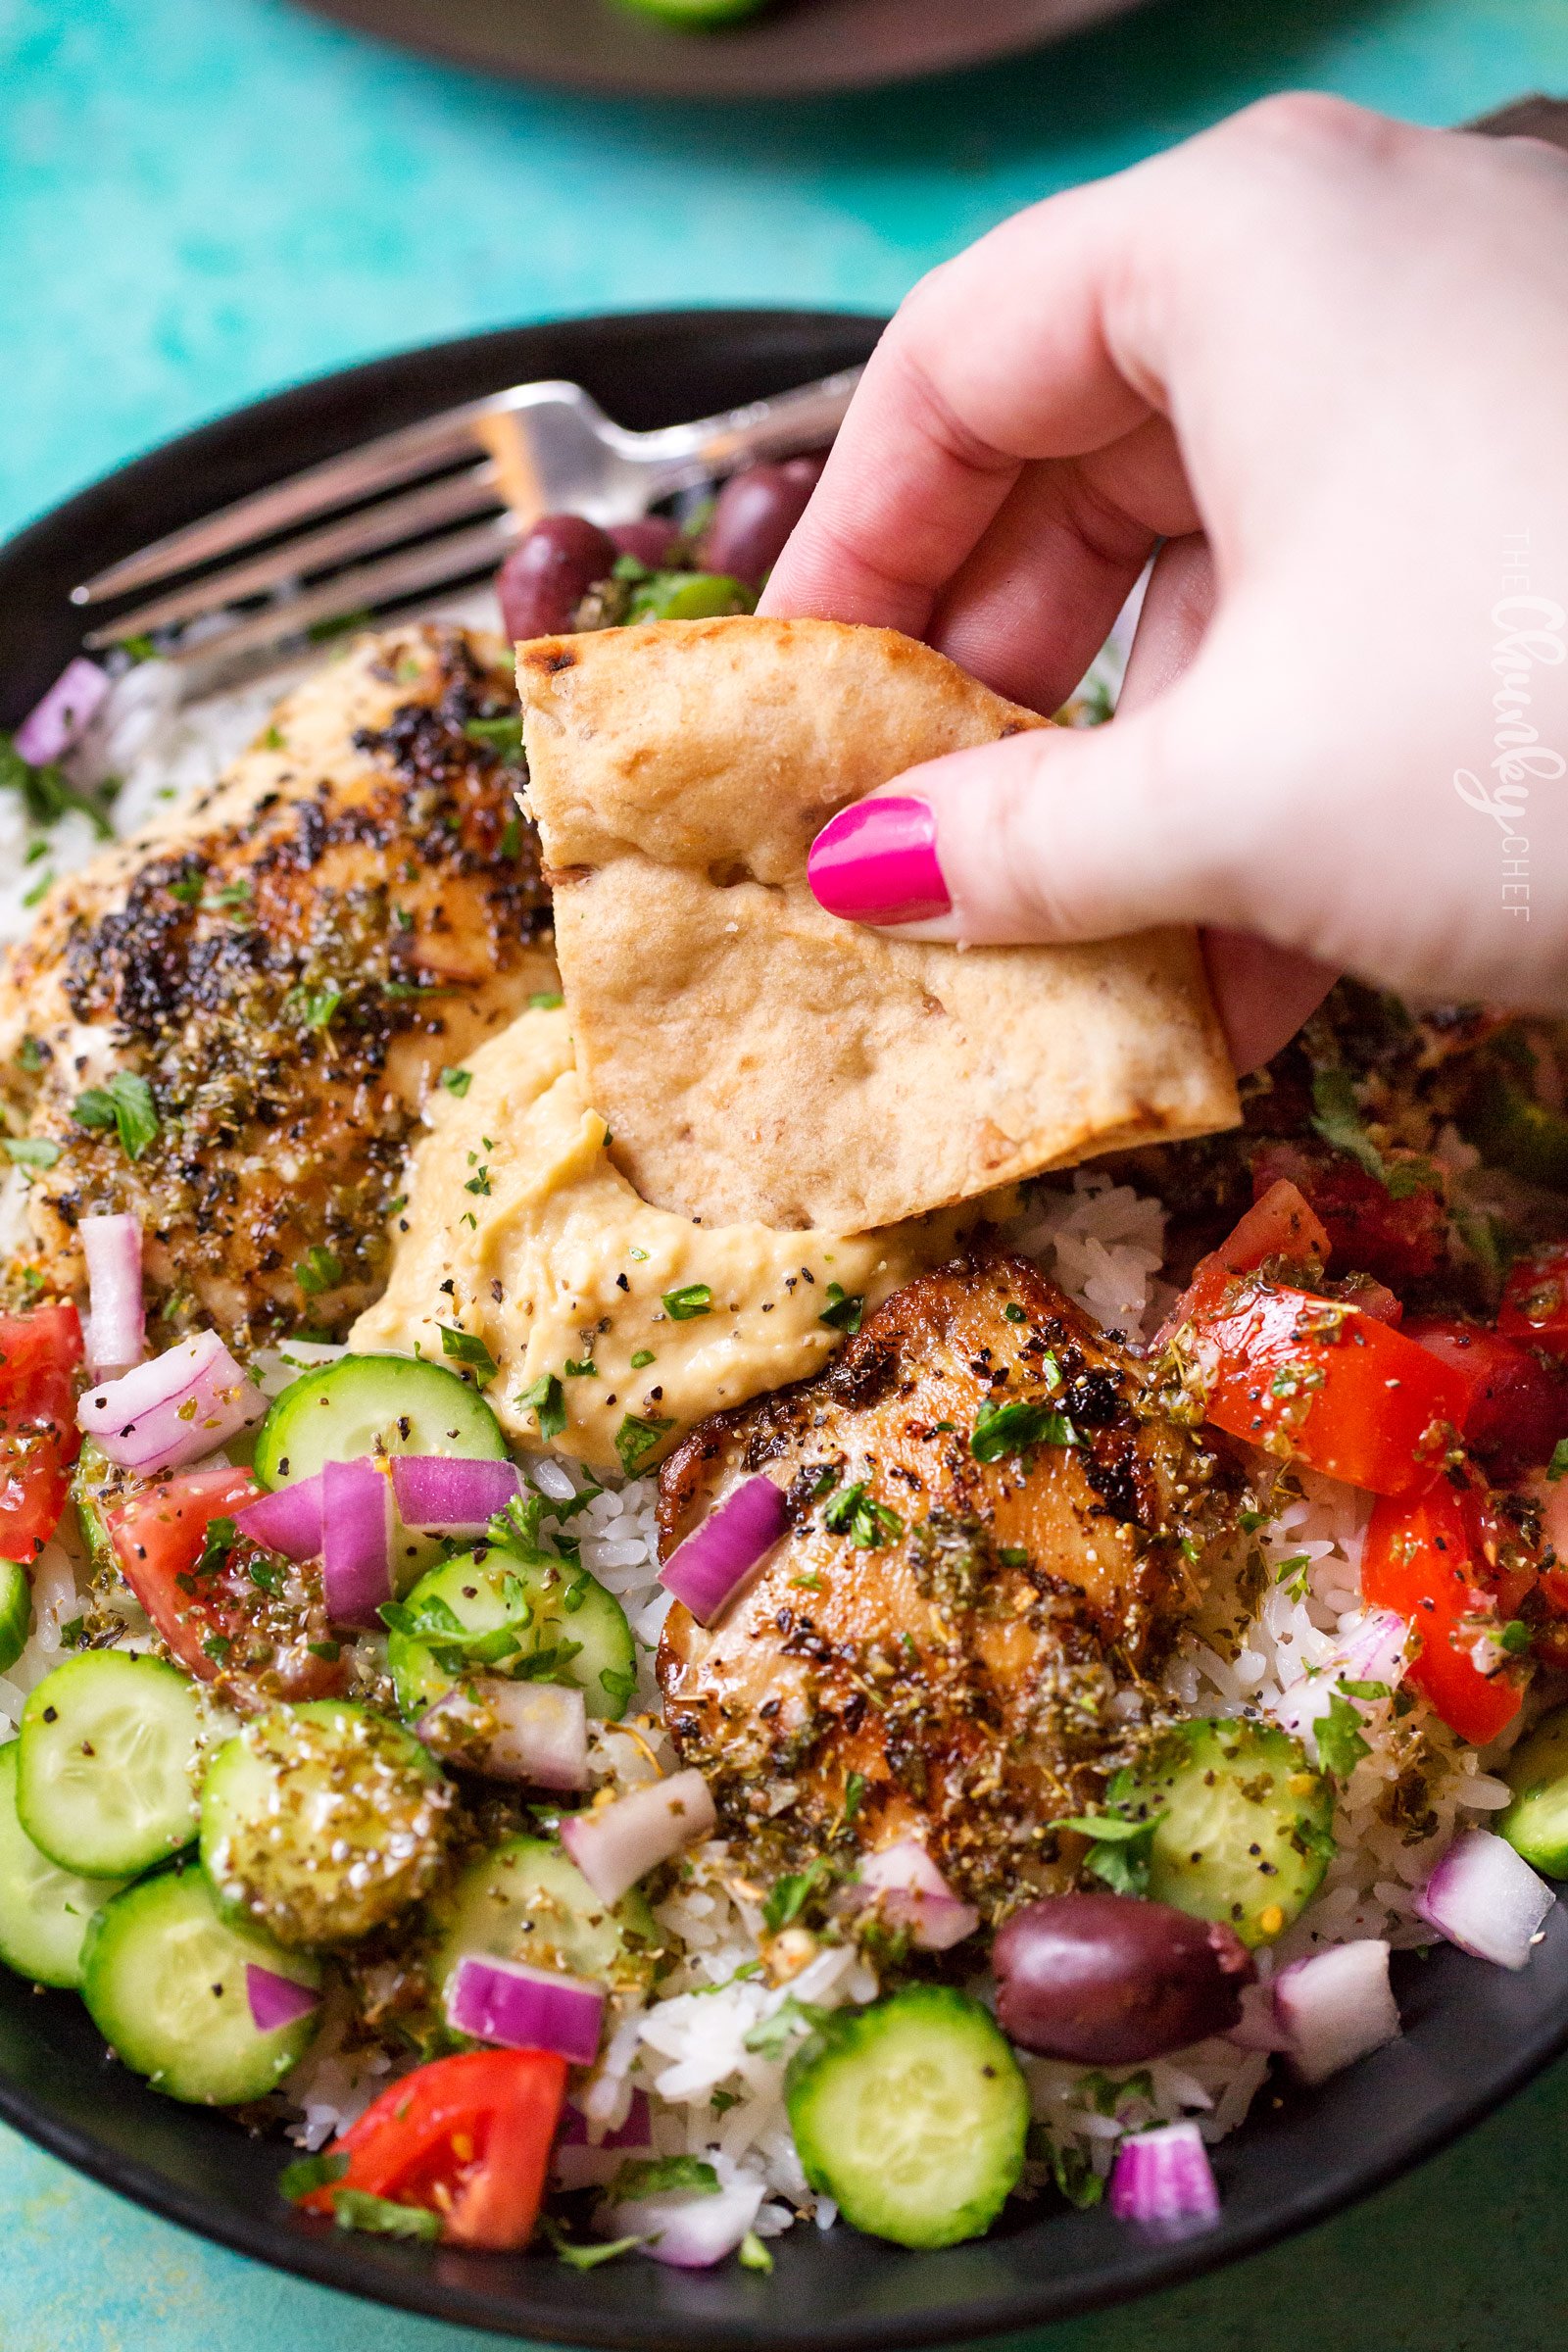 Hearty Greek Chicken and Rice Bowl | Ready in just 20 minutes or less, this rice bowl is packed with great Greek and Mediterranean flavors!  It's also perfect for meal prep or a back to school lunch box idea! | http://thechunkychef.com